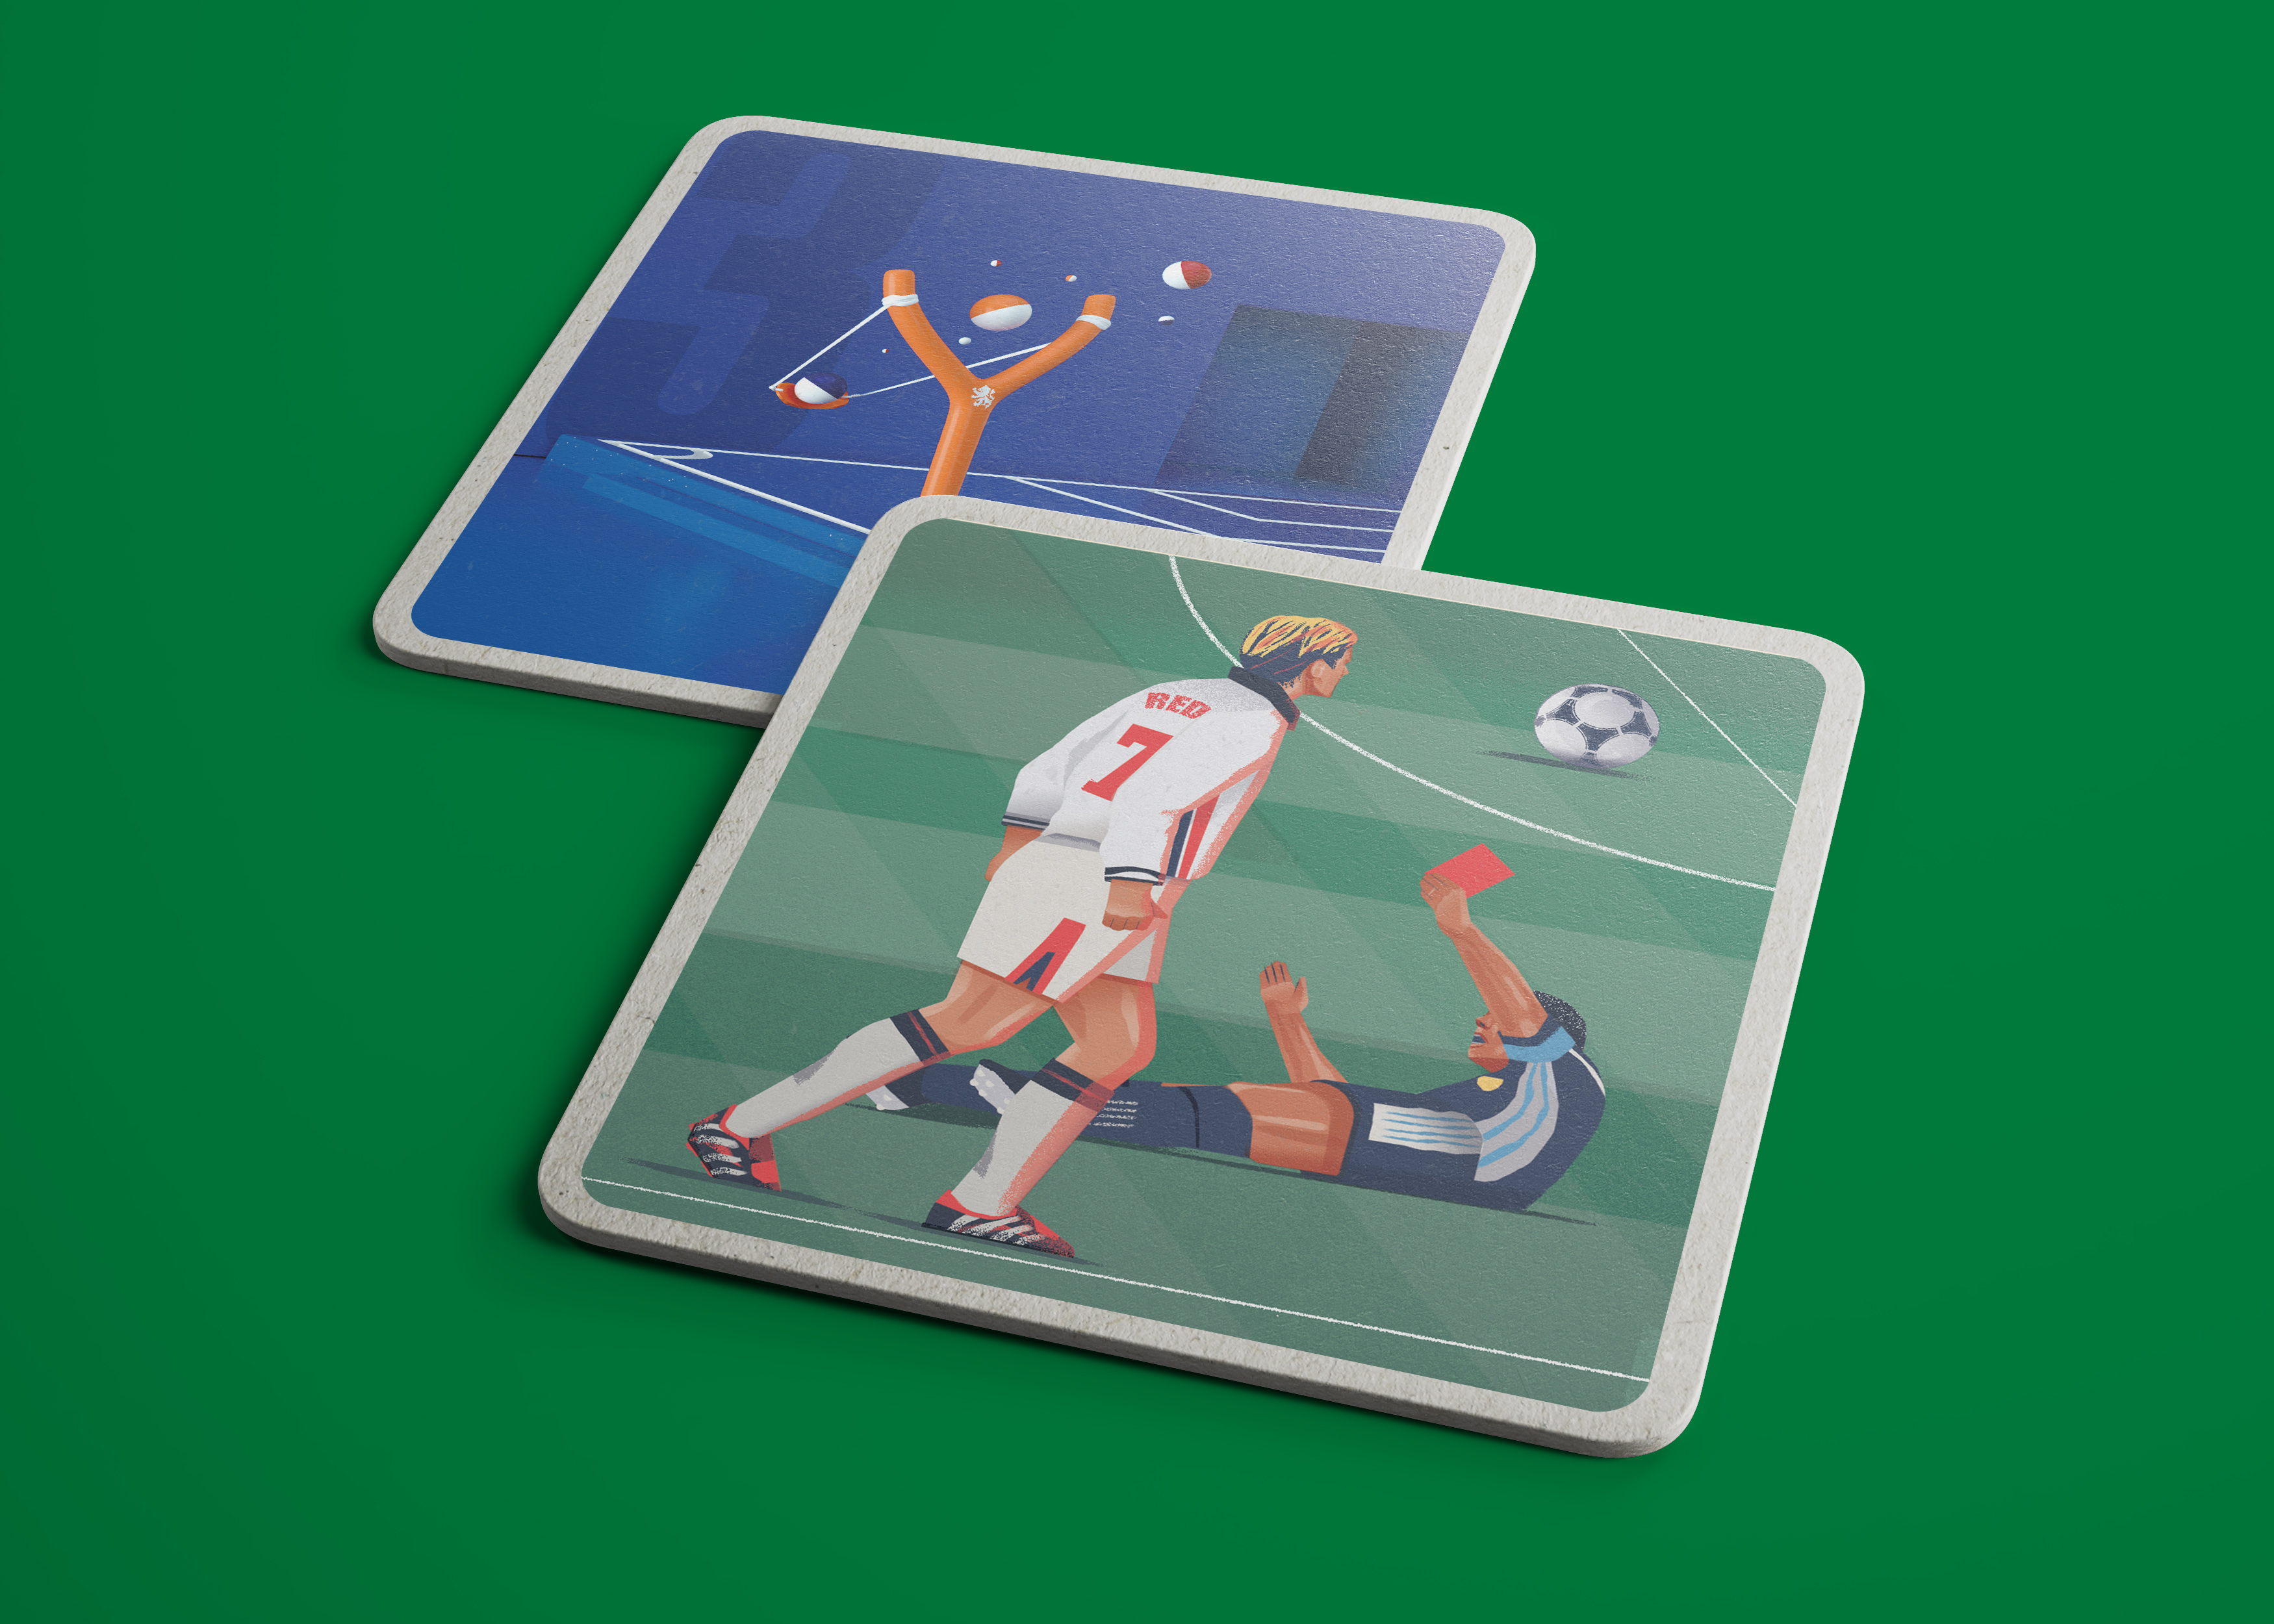 Two World Cup-themed coasters